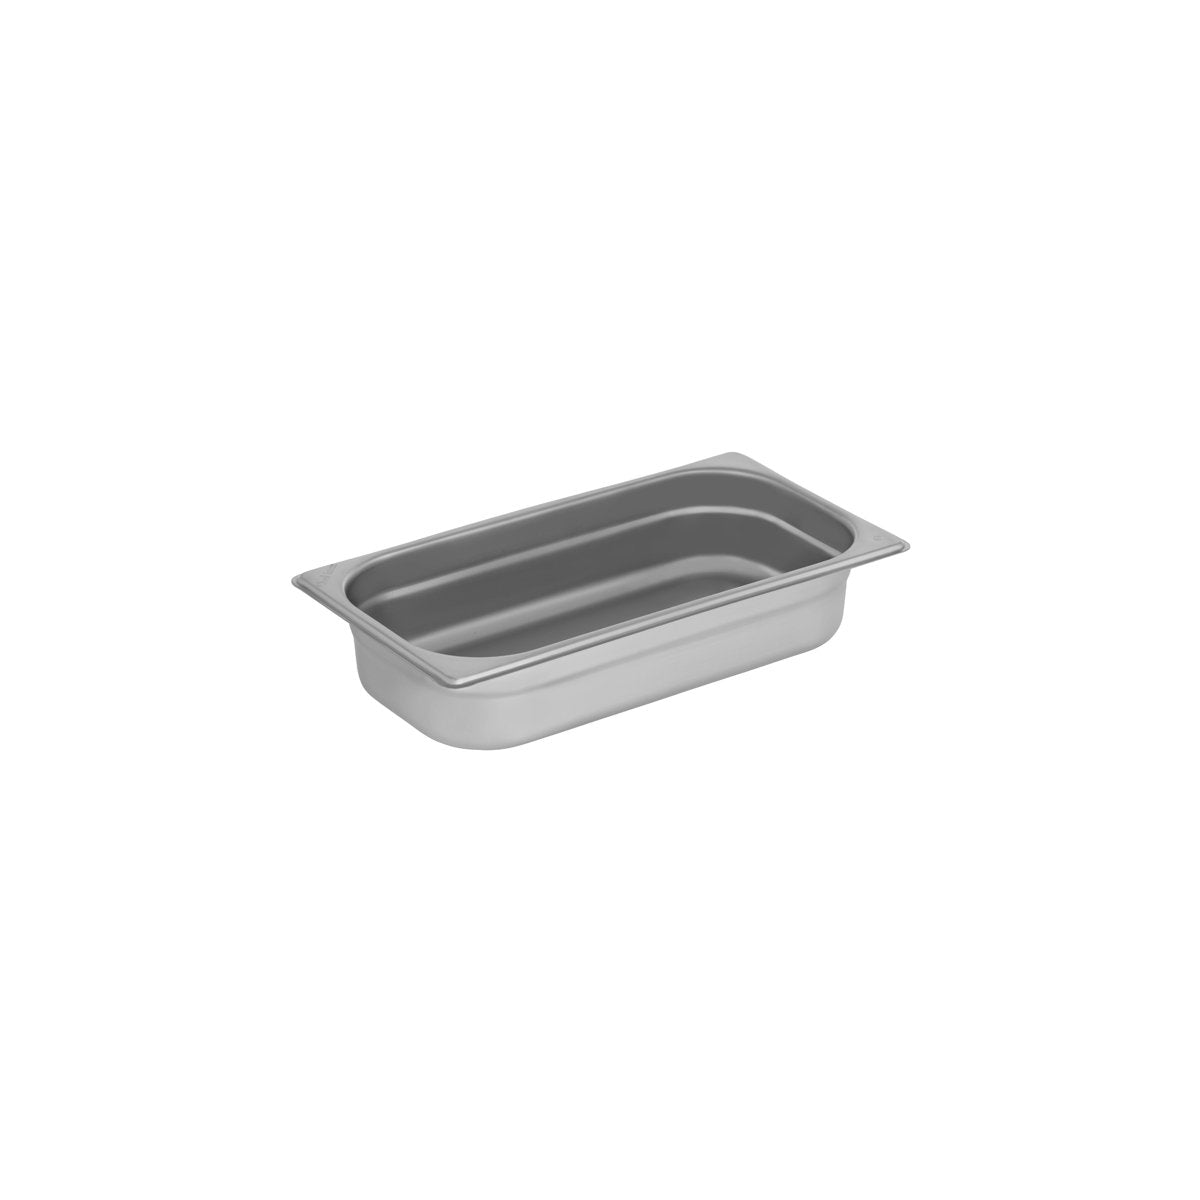 GN-13065 Chef Inox Gastronorm Pan 1/3 Size 65mm Tomkin Australia Hospitality Supplies